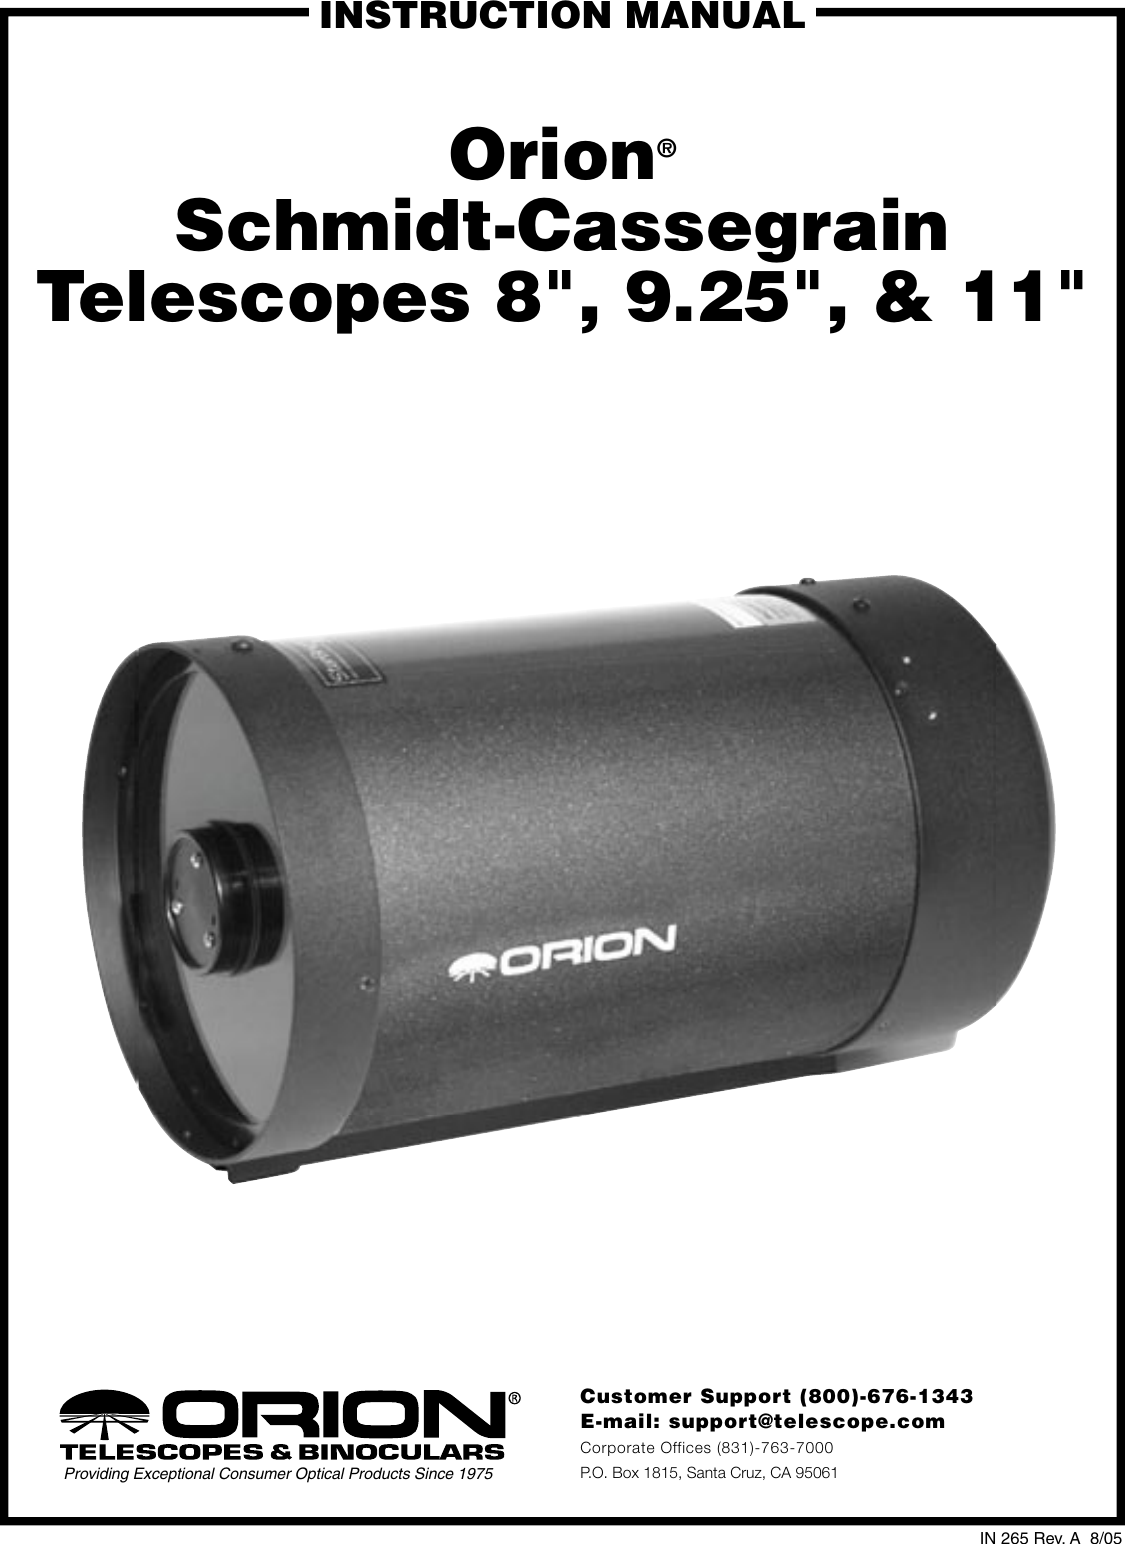 Page 1 of 8 - Orion Orion-Schmidt-Cassegrain-Telescopes-8-9-25-And-11-Users-Manual- IN 265_RevA_Orion_SCTs  Orion-schmidt-cassegrain-telescopes-8-9-25-and-11-users-manual